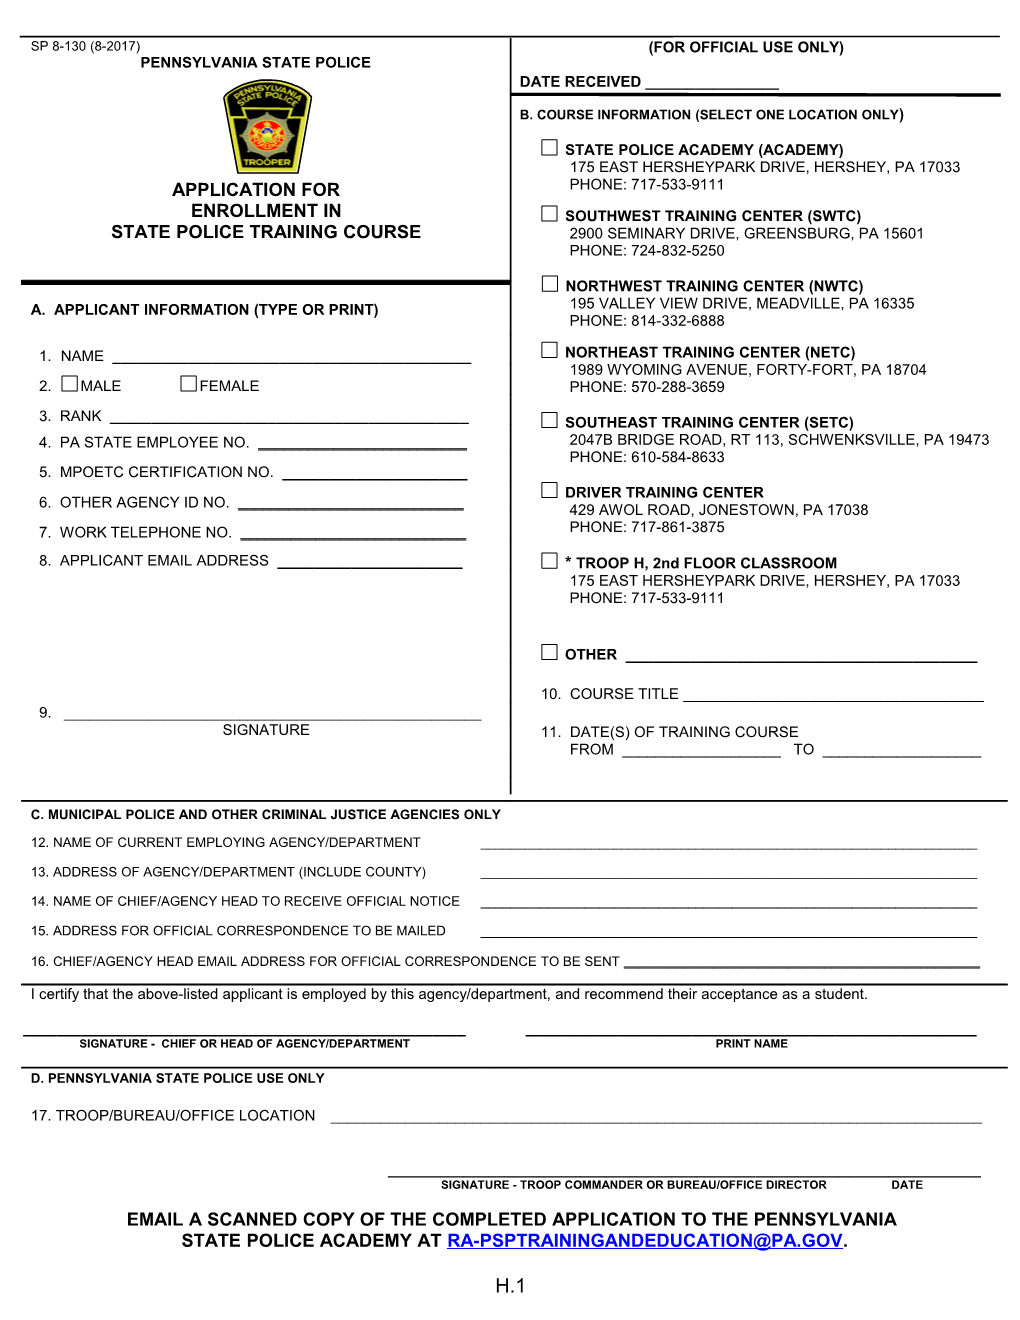 Application for Enrollment in State Police Training Course